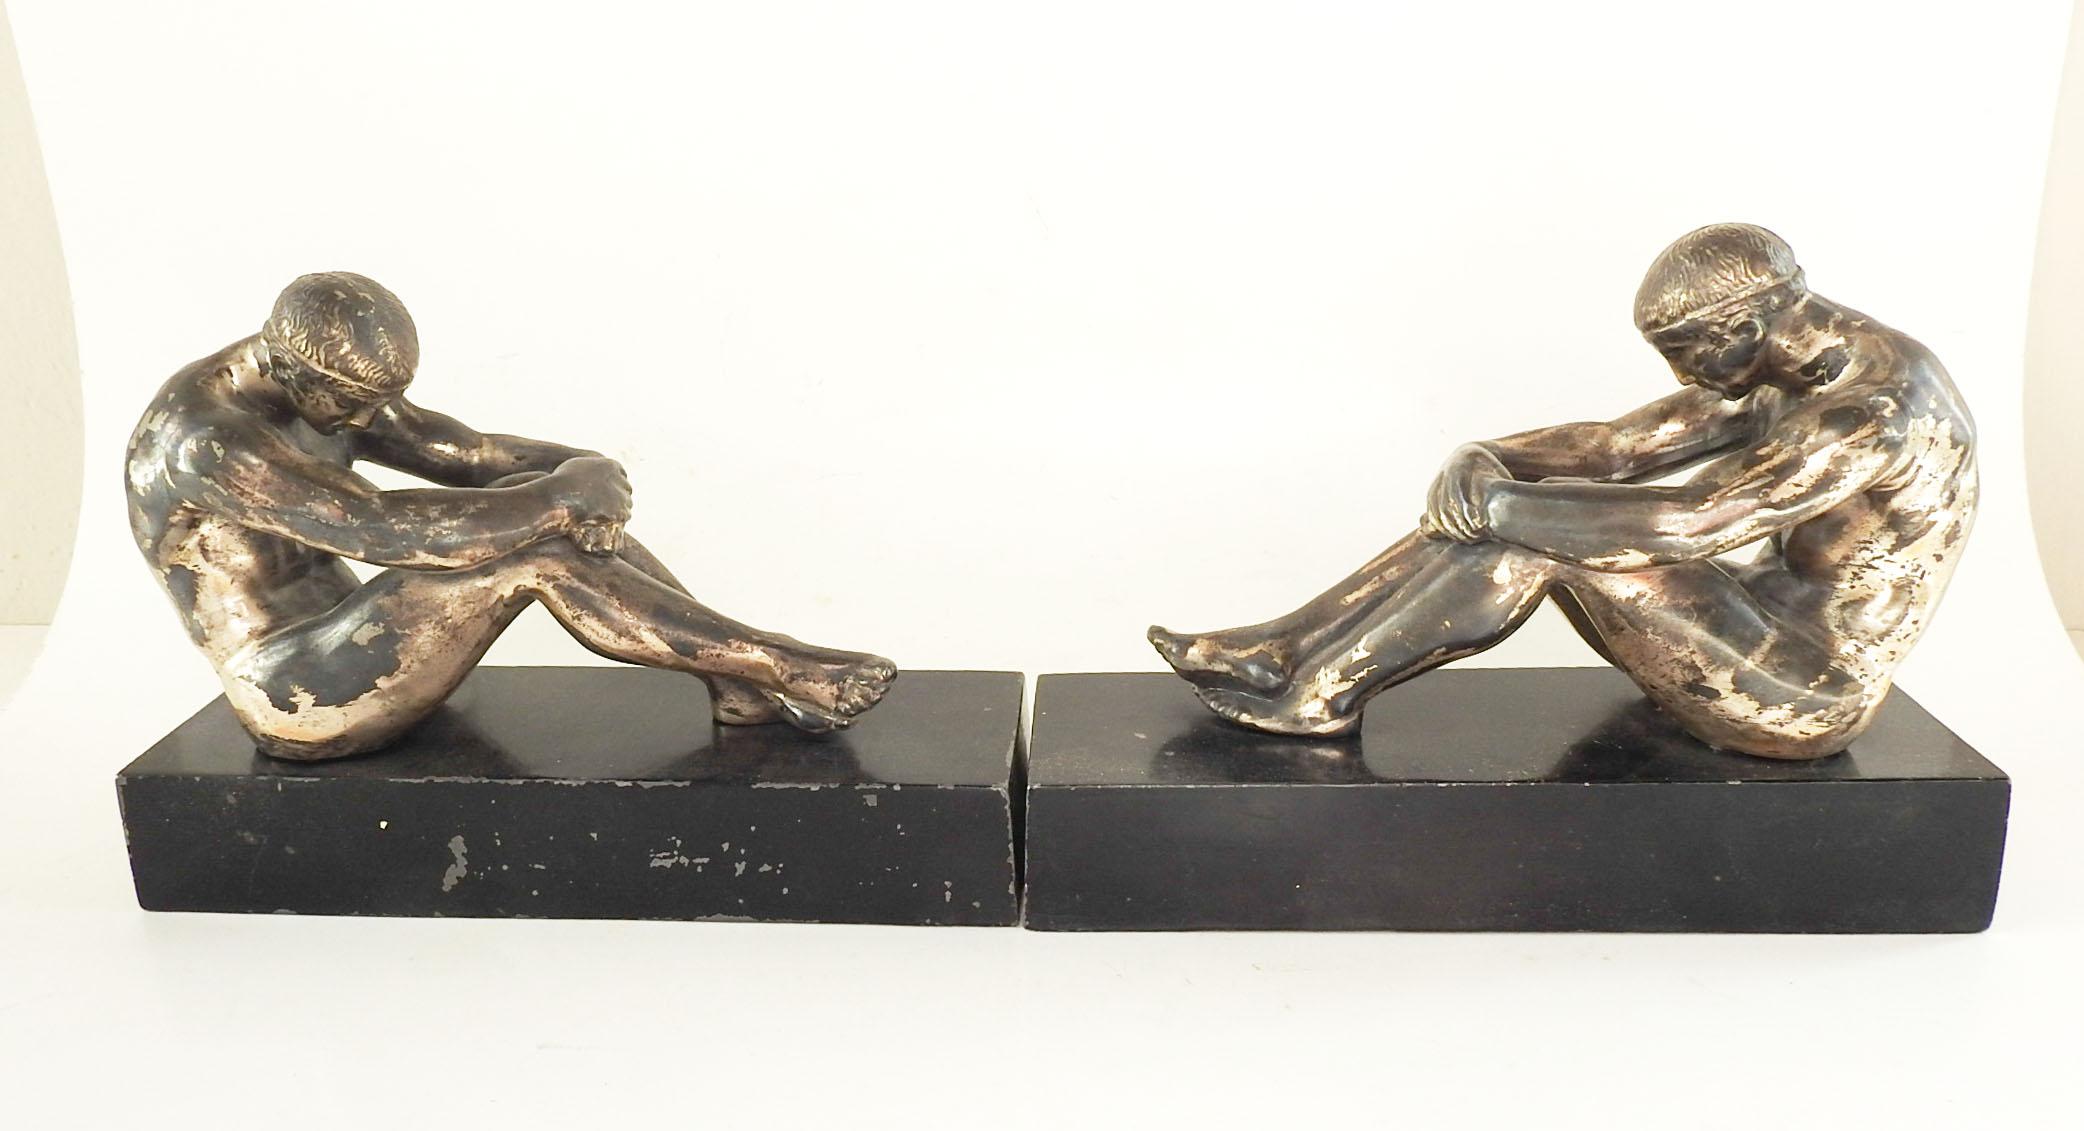 Pair of vintage circa 1920's Ronson Art metal works bookends. Greek athletes on black base with silver patina on figures. Felt bottoms with original sticker, scuffing to bases.